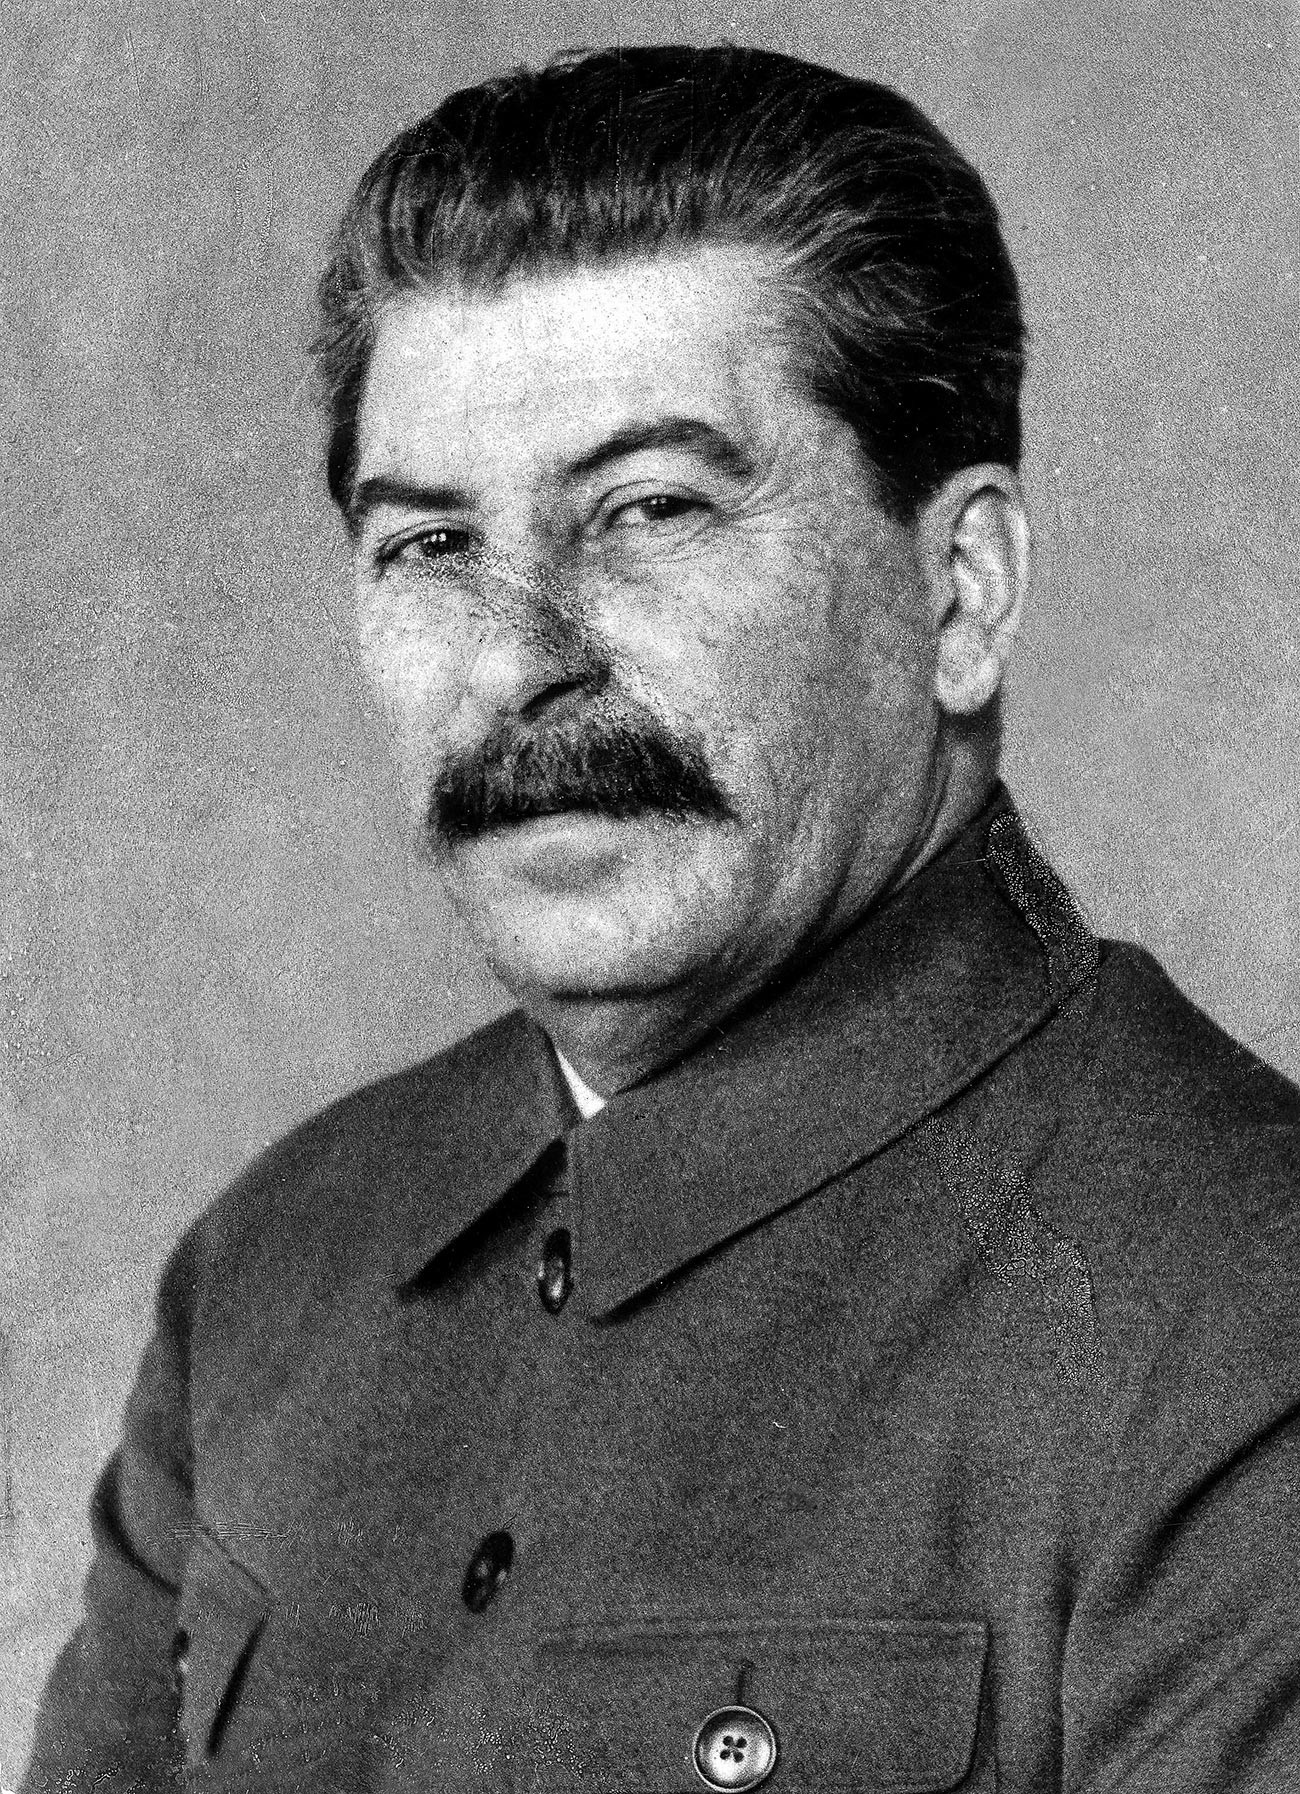 This is one of the rare photos of Stalin where pockmarking is obvious on his face.